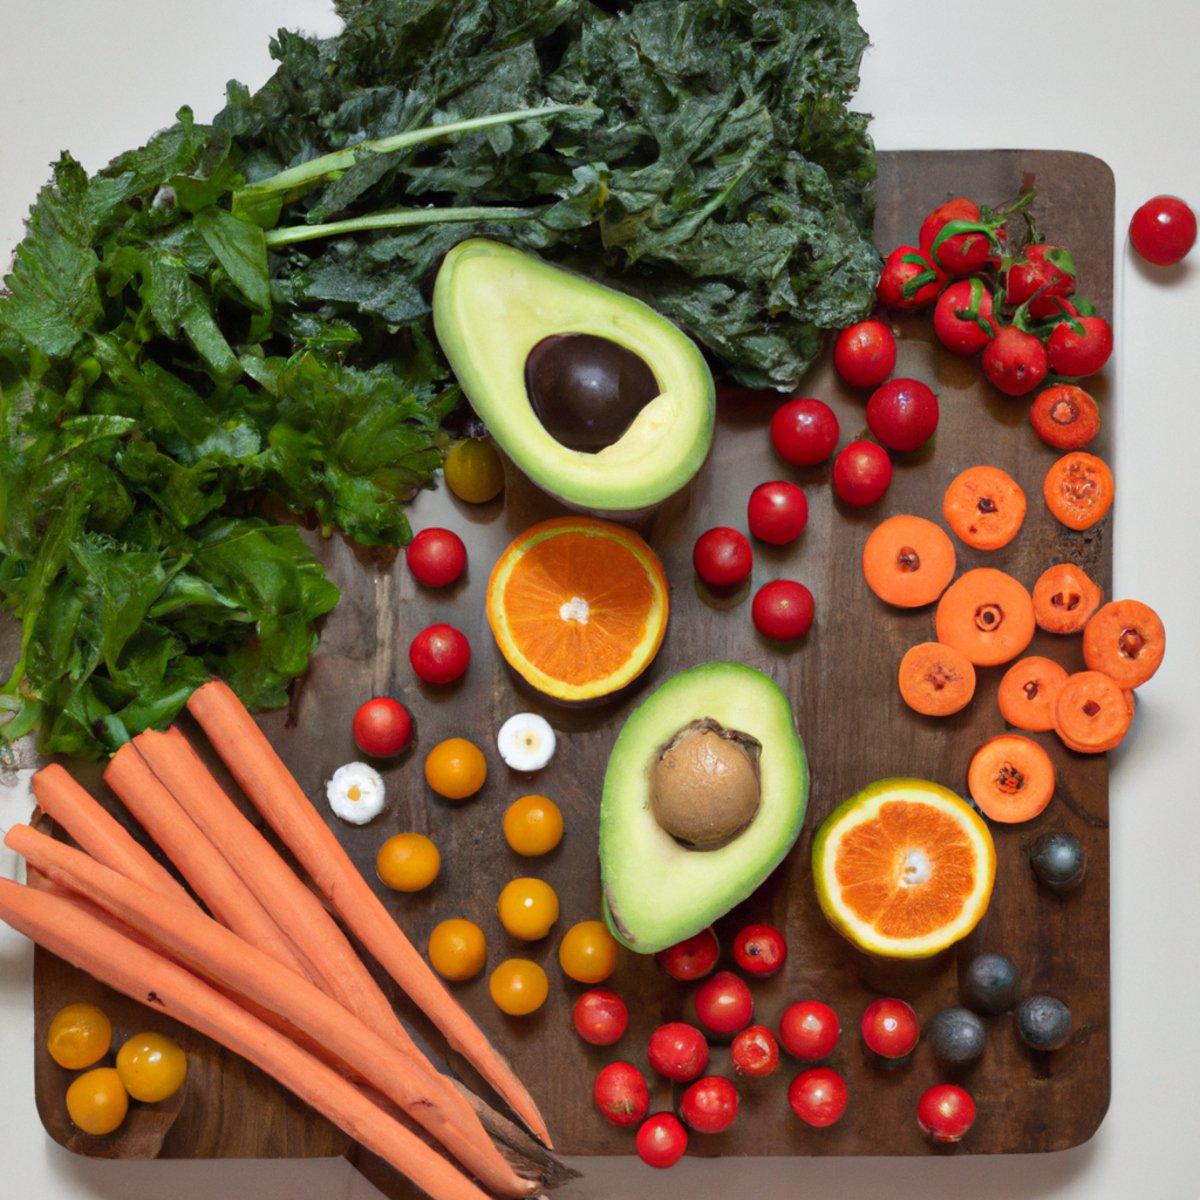 The photo features a wooden cutting board with a variety of colorful fruits and vegetables arranged in an artful display. A ripe avocado, sliced in half, sits next to a pile of bright red cherry tomatoes and a bunch of leafy kale. A vibrant orange carrot and a bunch of crisp green celery sticks add a pop of color to the scene. In the background, a glass jar filled with chia seeds and a small bowl of quinoa can be seen, emphasizing the importance of incorporating nutrient-dense foods into one's diet. The photo is inviting and inspires the reader to experiment with incorporating these functional foods into their meals.